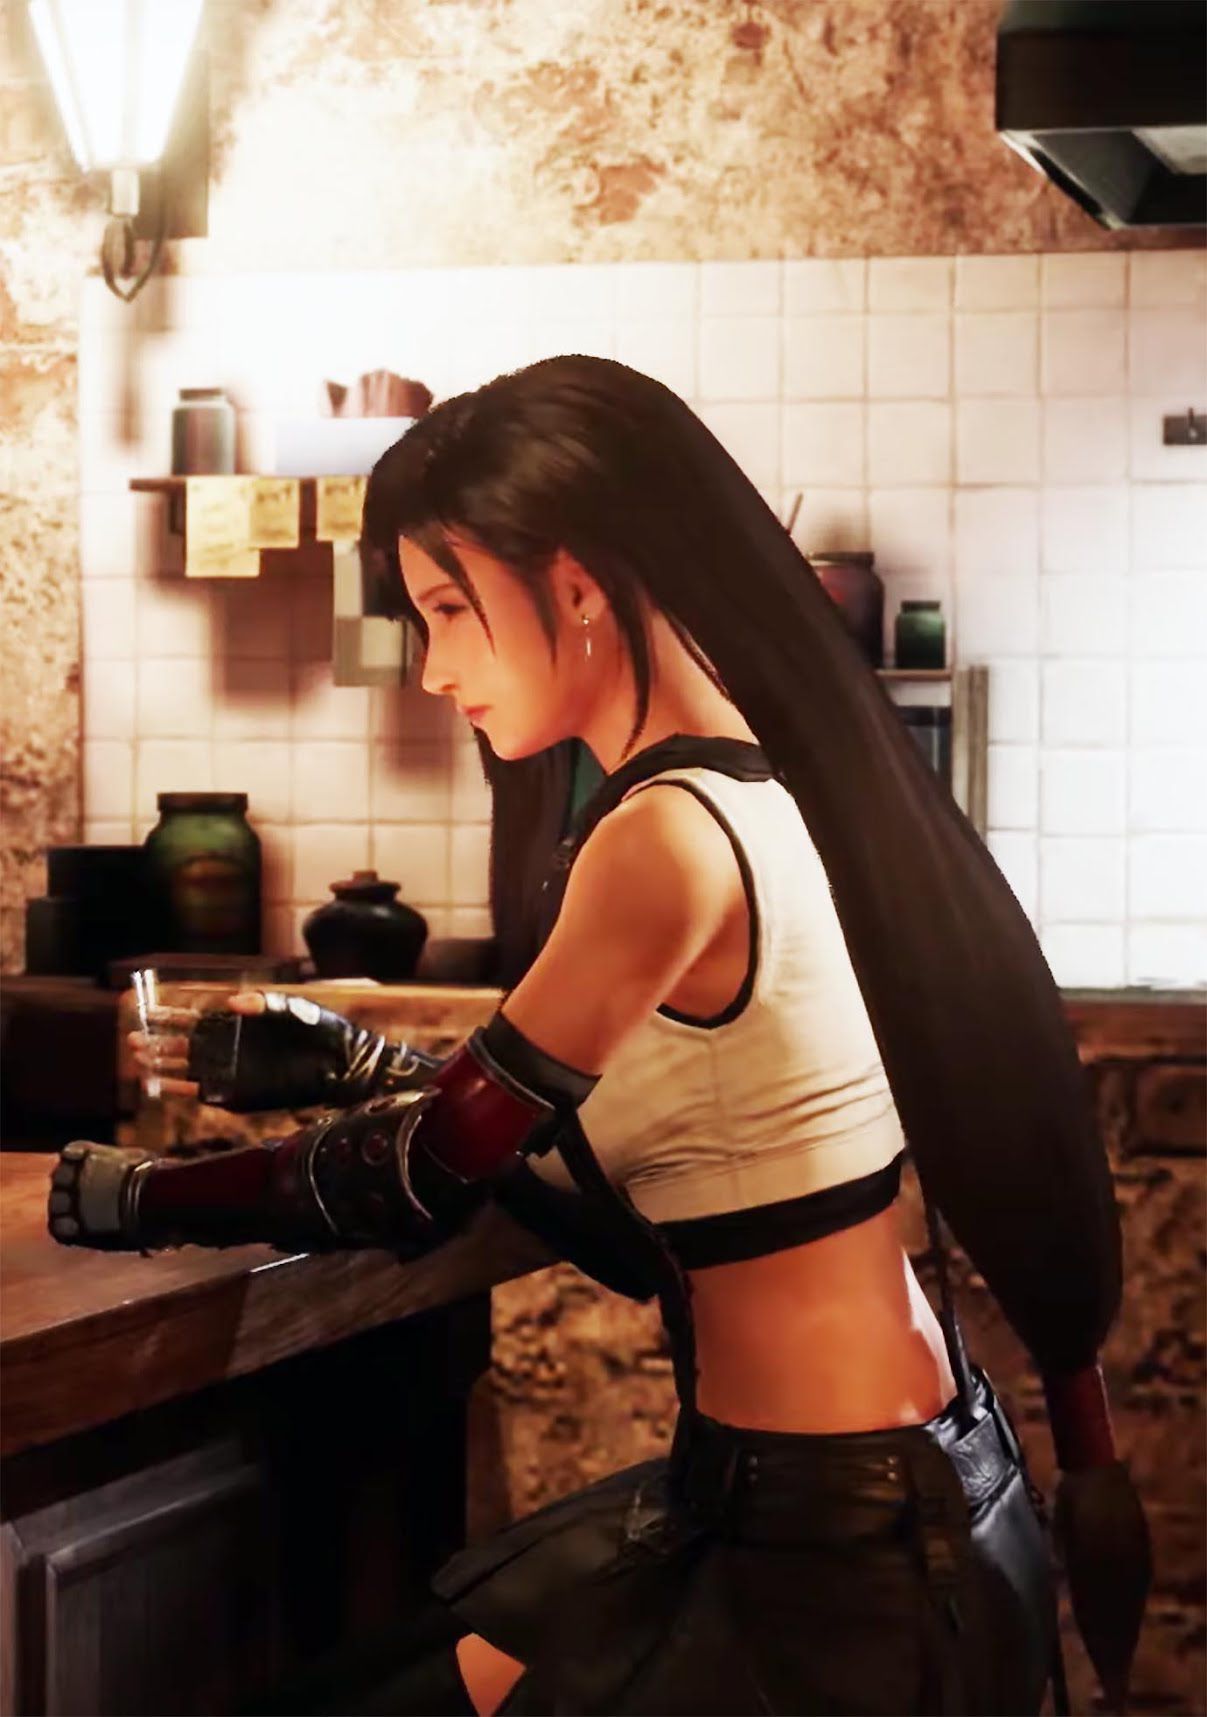 [Image] Wai, FF7R Tifa's Chie want to see you soon Musebi wwwwwww 2